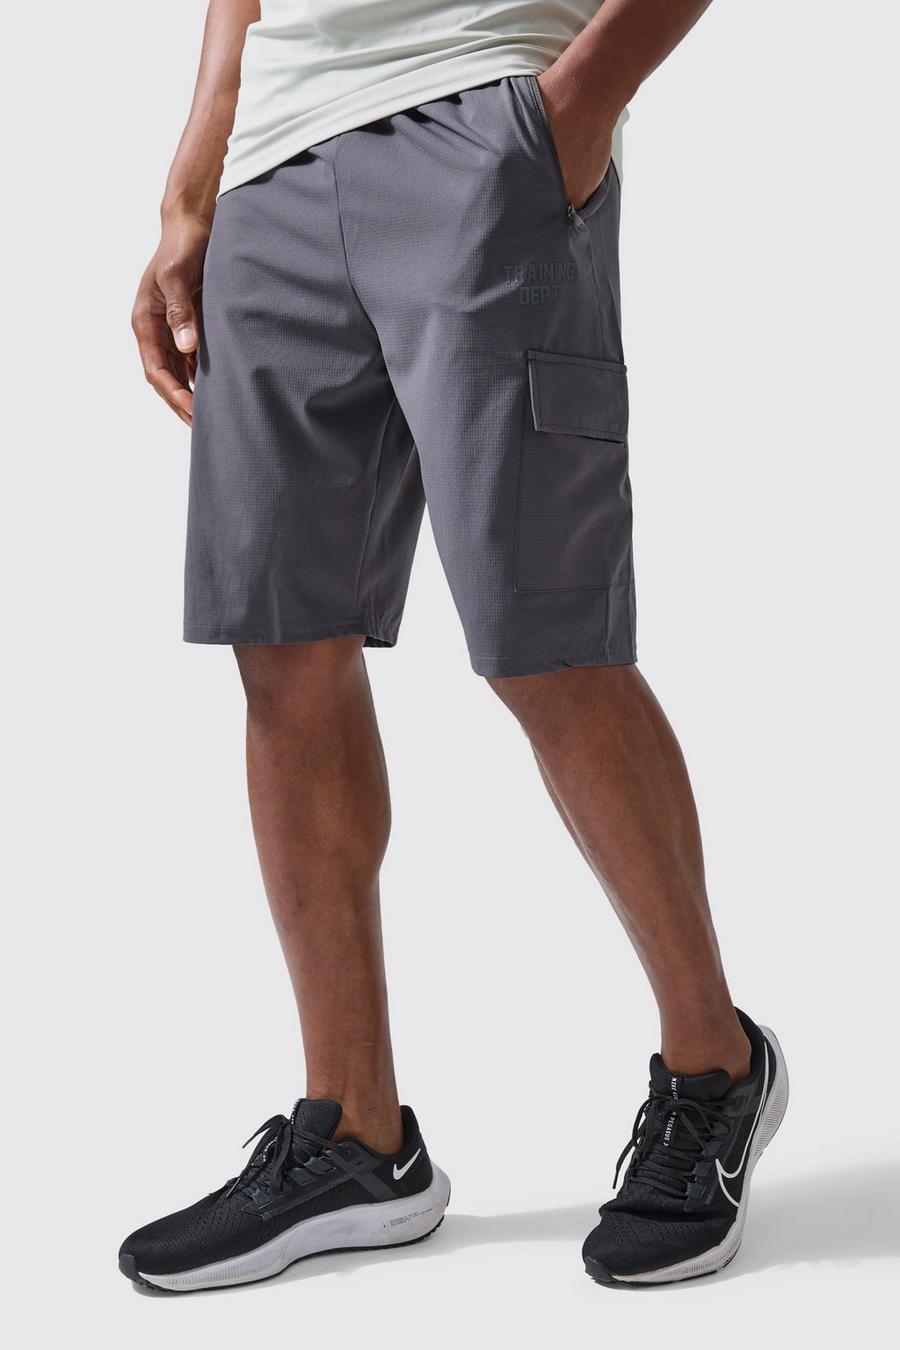 Tall Active Training Dept Cargo-Shorts, Charcoal